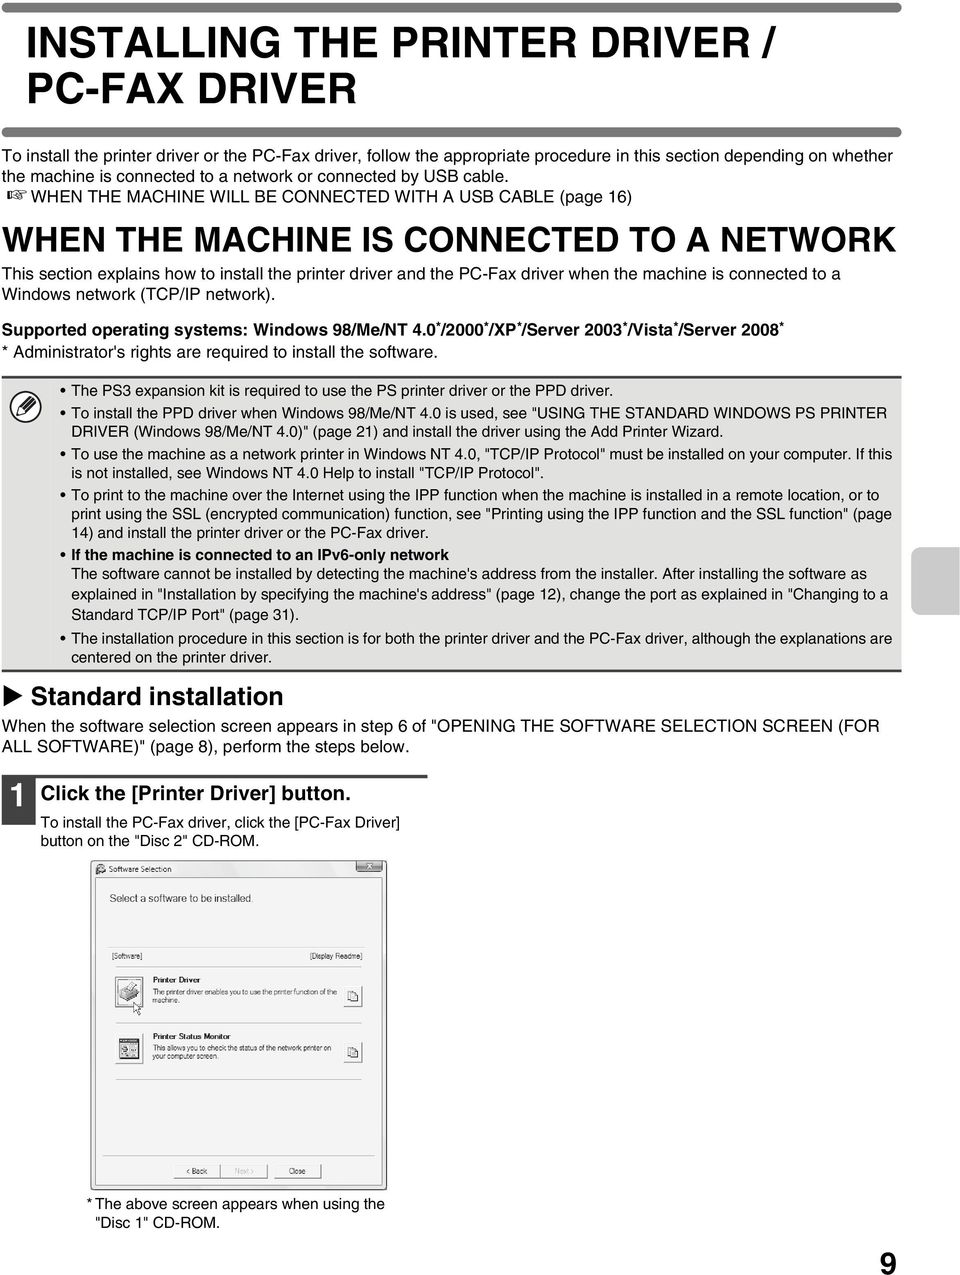 WHEN THE MACHINE WILL BE CONNECTED WITH A USB CABLE (page 16) WHEN THE MACHINE IS CONNECTED TO A NETWORK This section explains how to install the printer driver and the PC-Fax driver when the machine